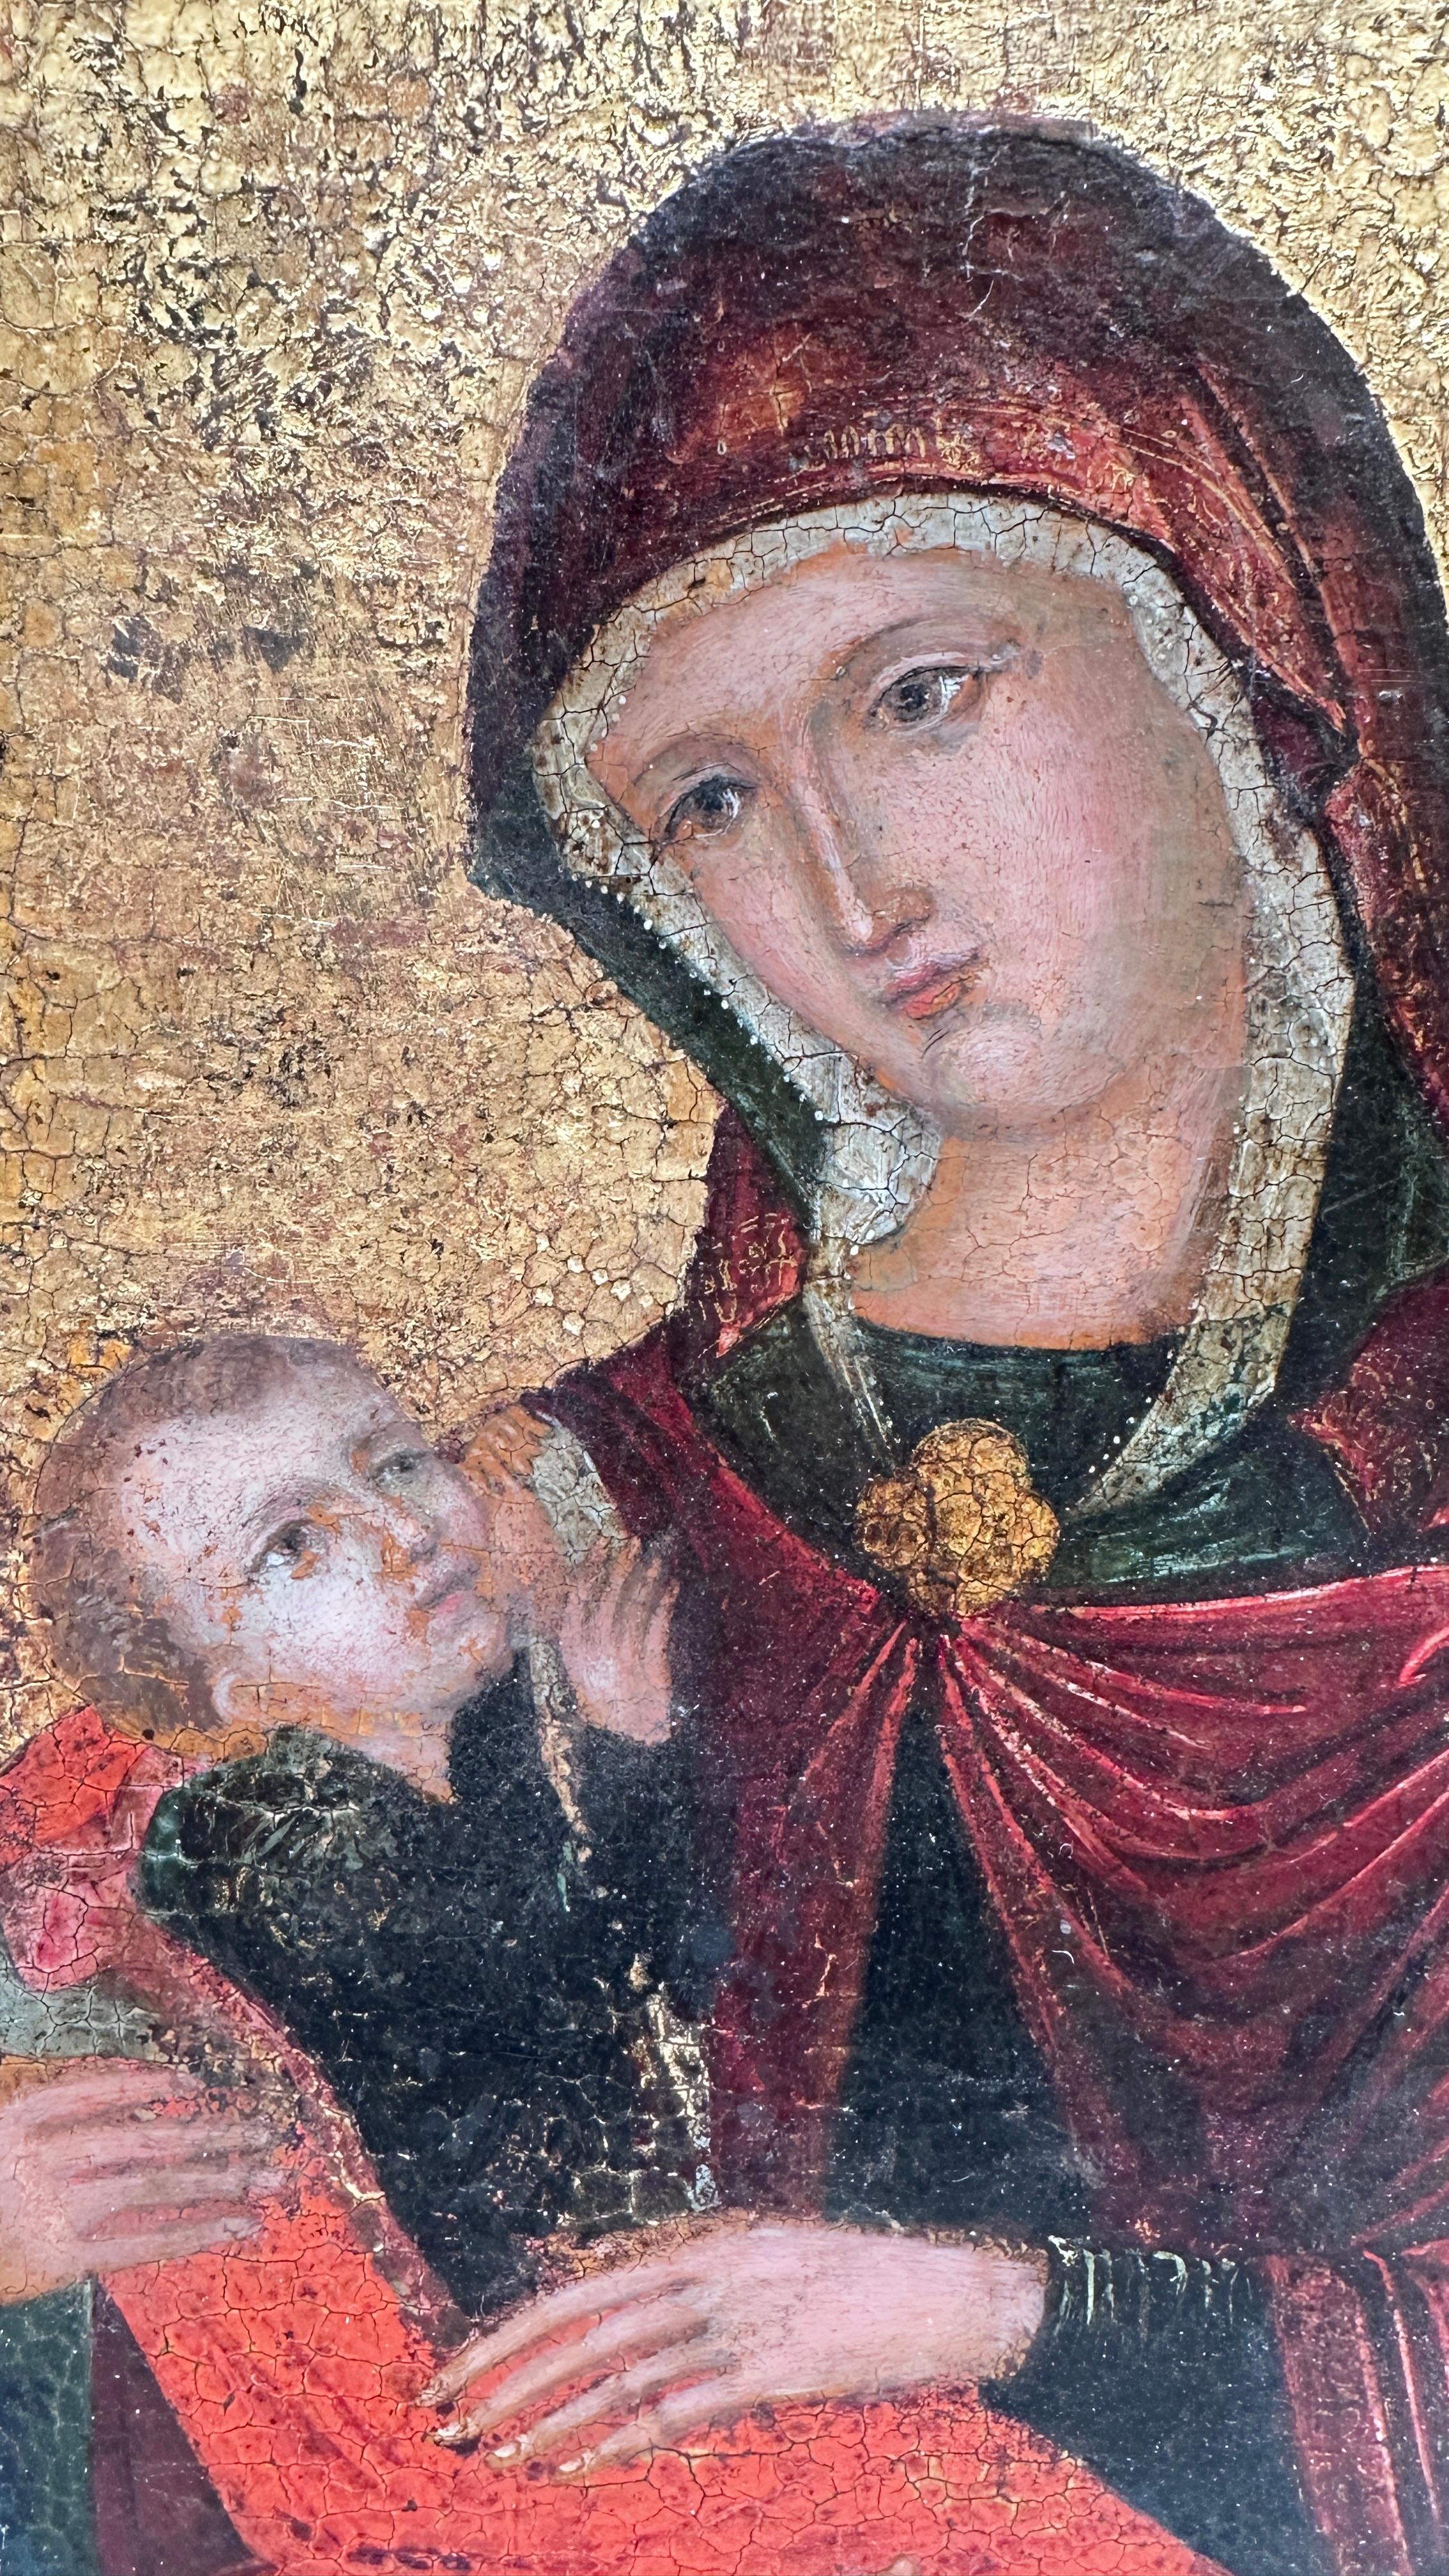 Italian 16th CENTURY VIRGIN MARY WITH CHILD ON A GOLDEN BACKGROUND 